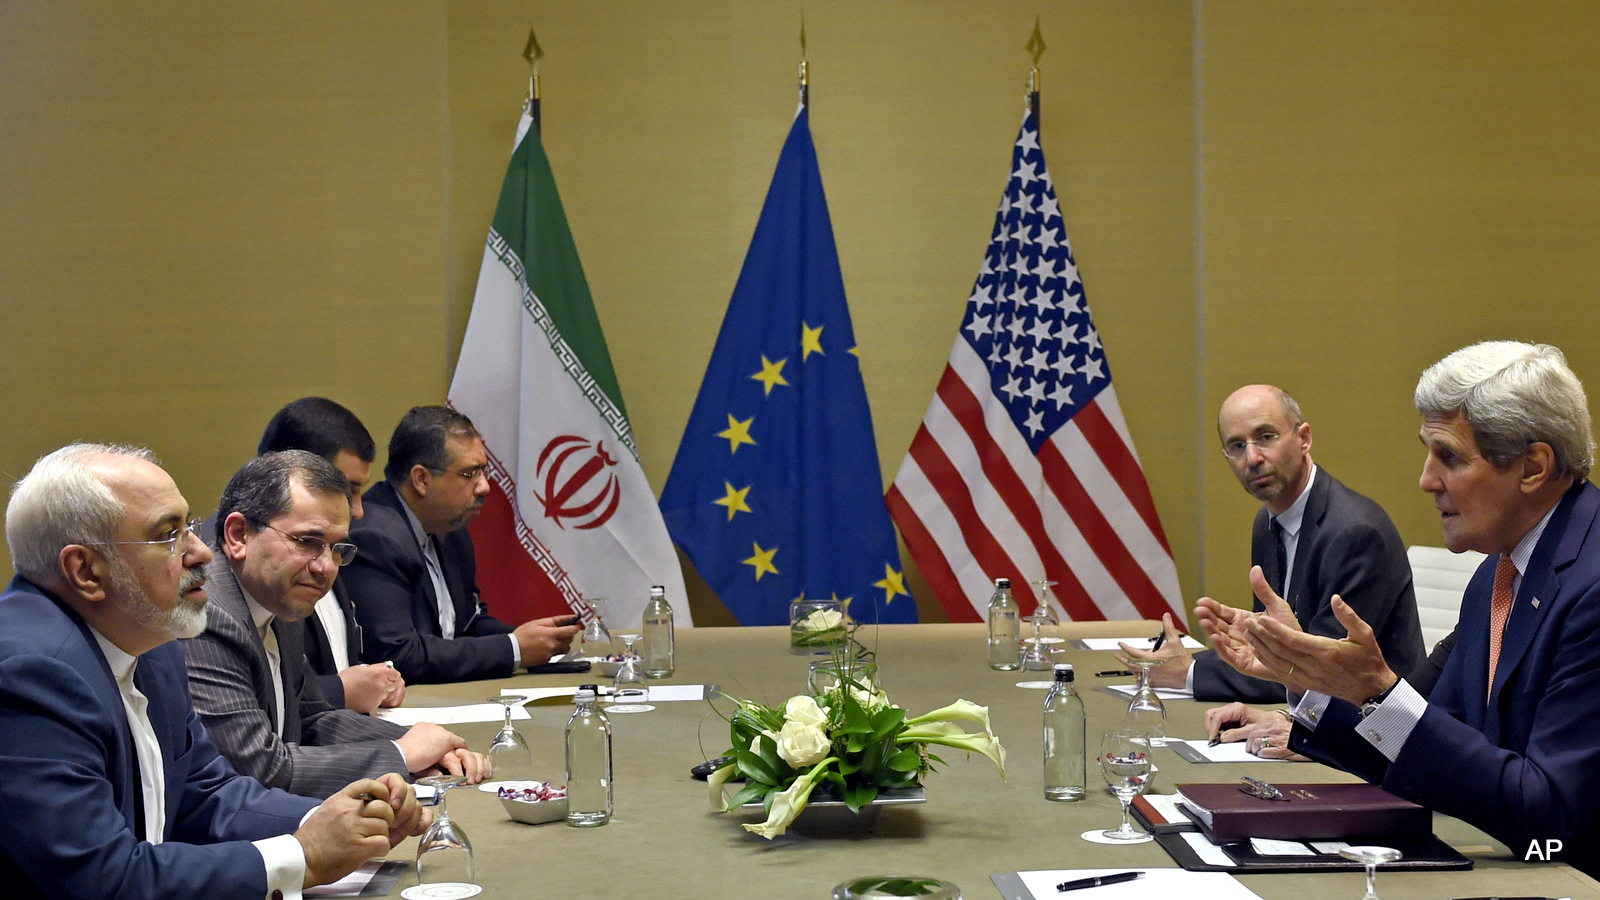 U.S. Secretary of State John Kerry, right, during official talks with Iranian Foreign Minister Mohammad Javad Zarif, left, in Geneva, Switzerland, Saturday, May 30, 2015.